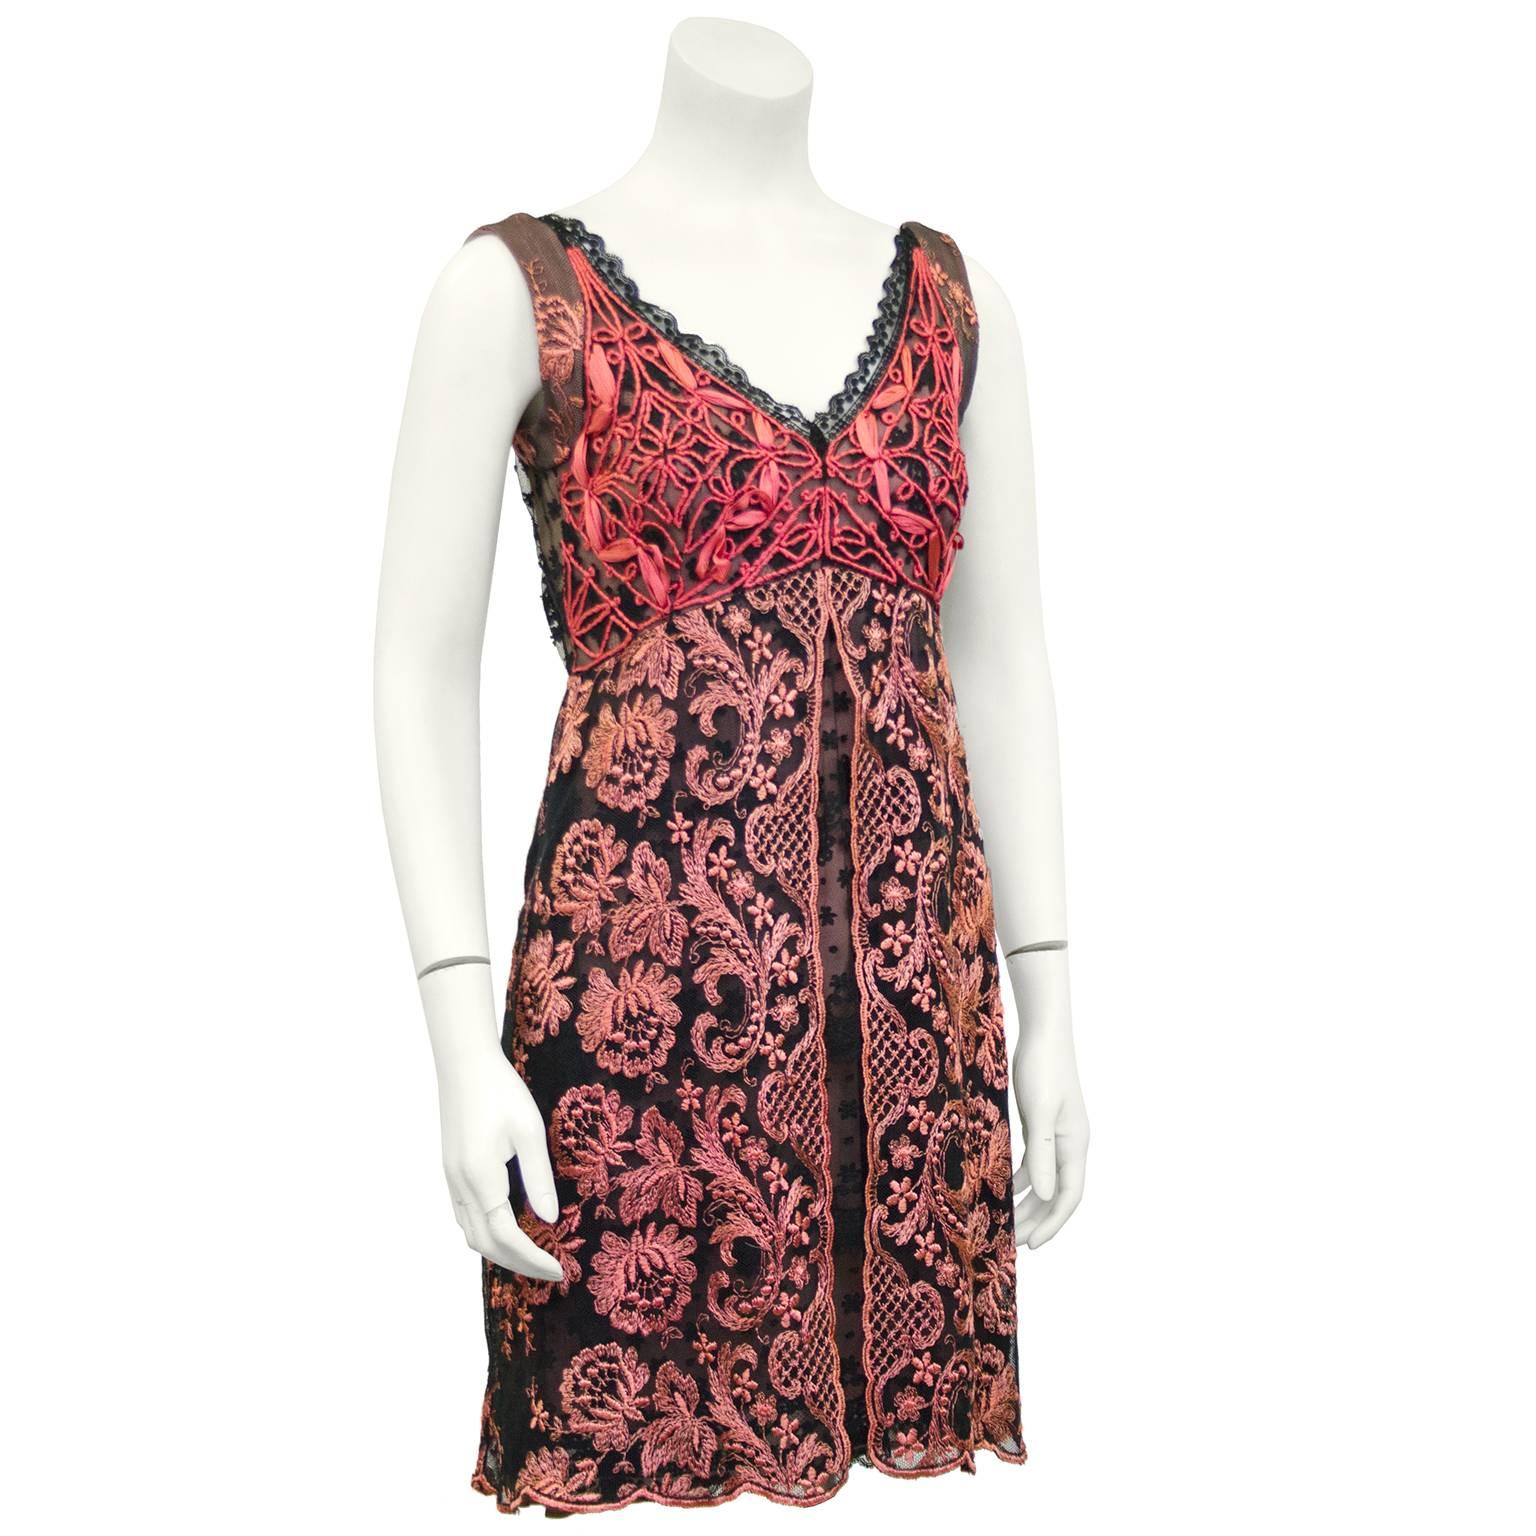 Beautiful 1990s Christian Lacroix guipure floral lace cocktail dress. Dress is sheer with a pink silk lining showing through. Black with bright pink lace on bodice and light pink on skirt. Excellent vintage condition. Fits like a US 2-4. Original